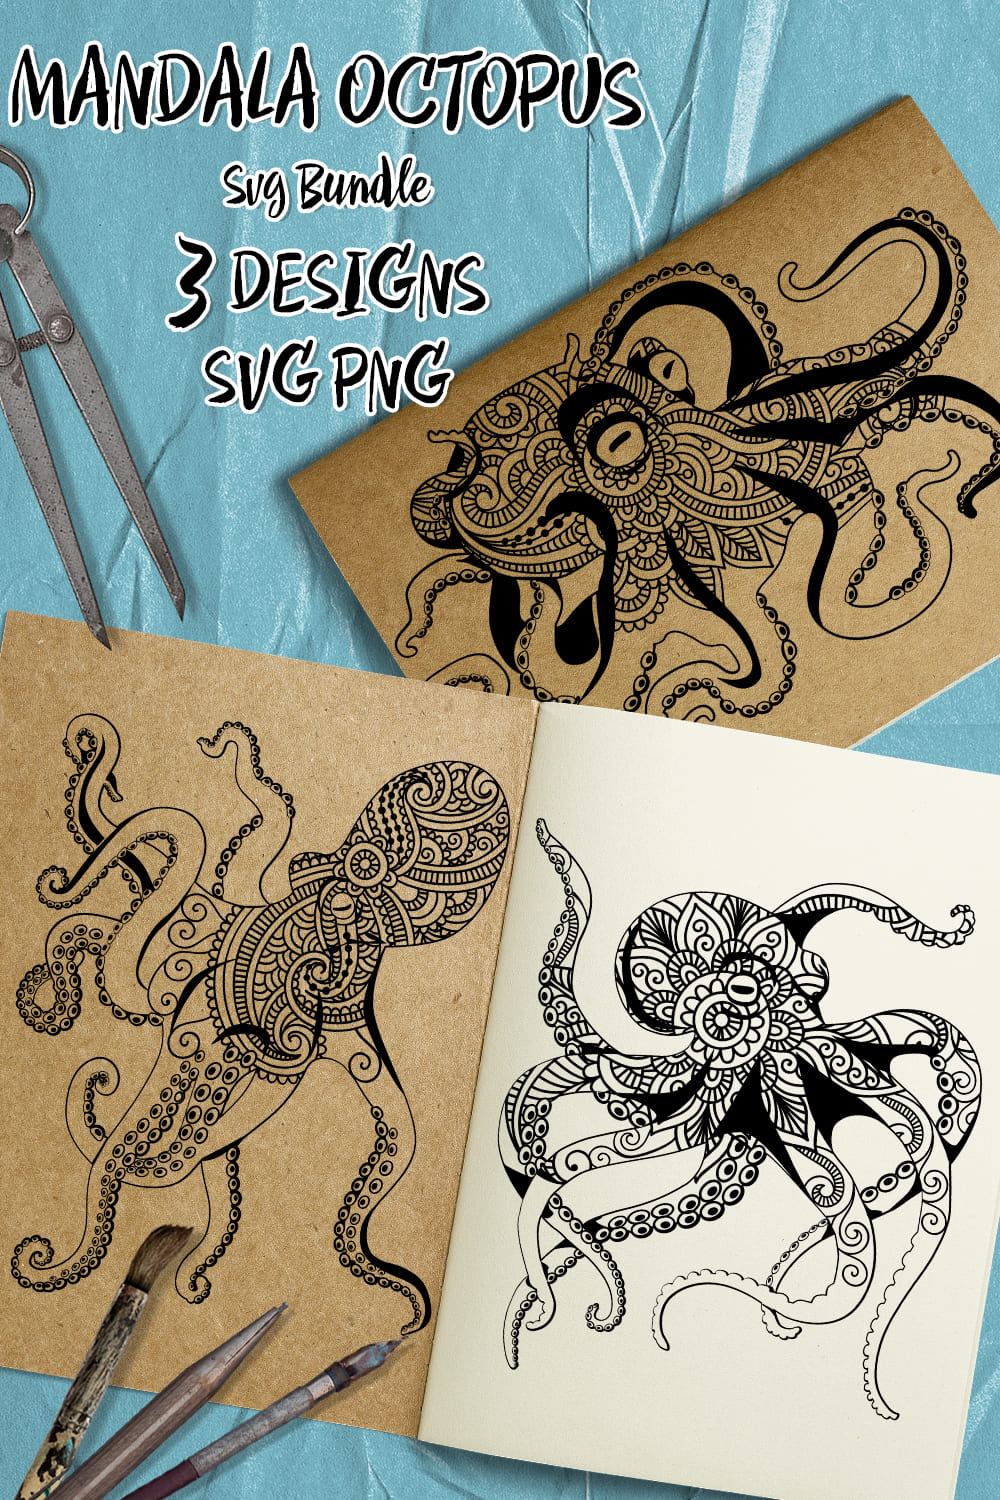 So realistic octopuses in a hand-drawn format.